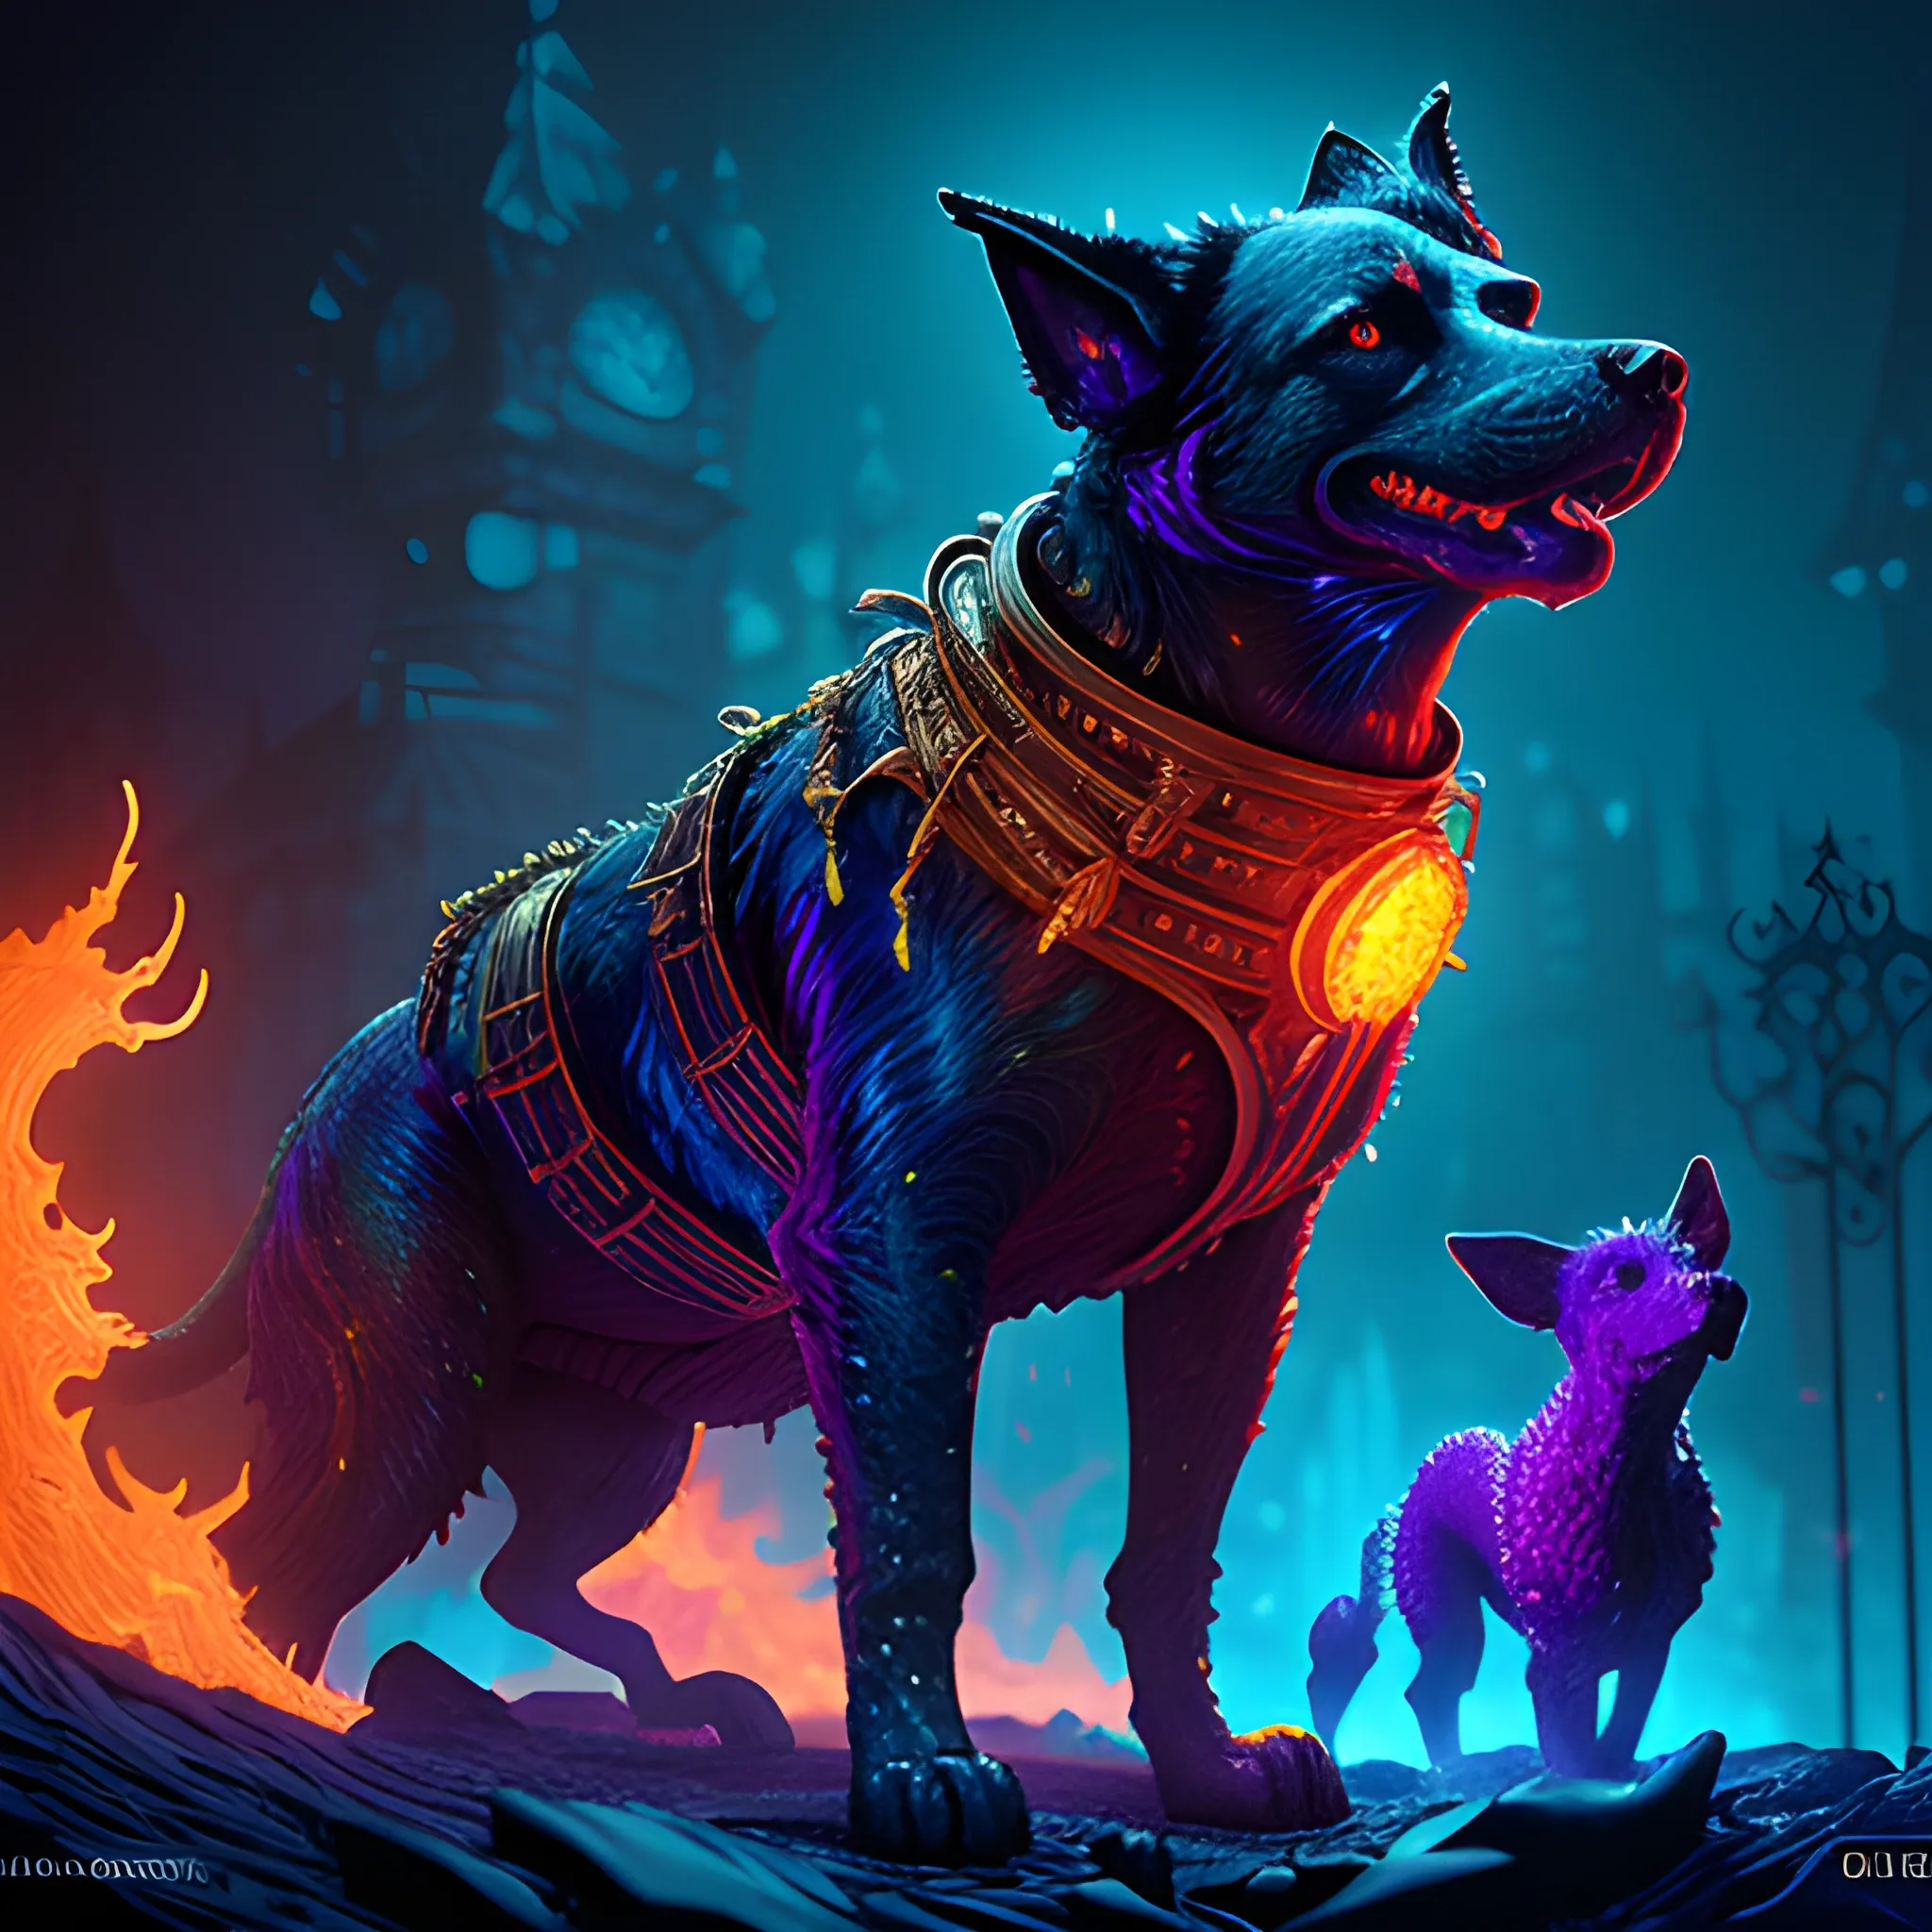 fire dogs, hell dog, luminous colorful sparkles, ominous, eldri ...